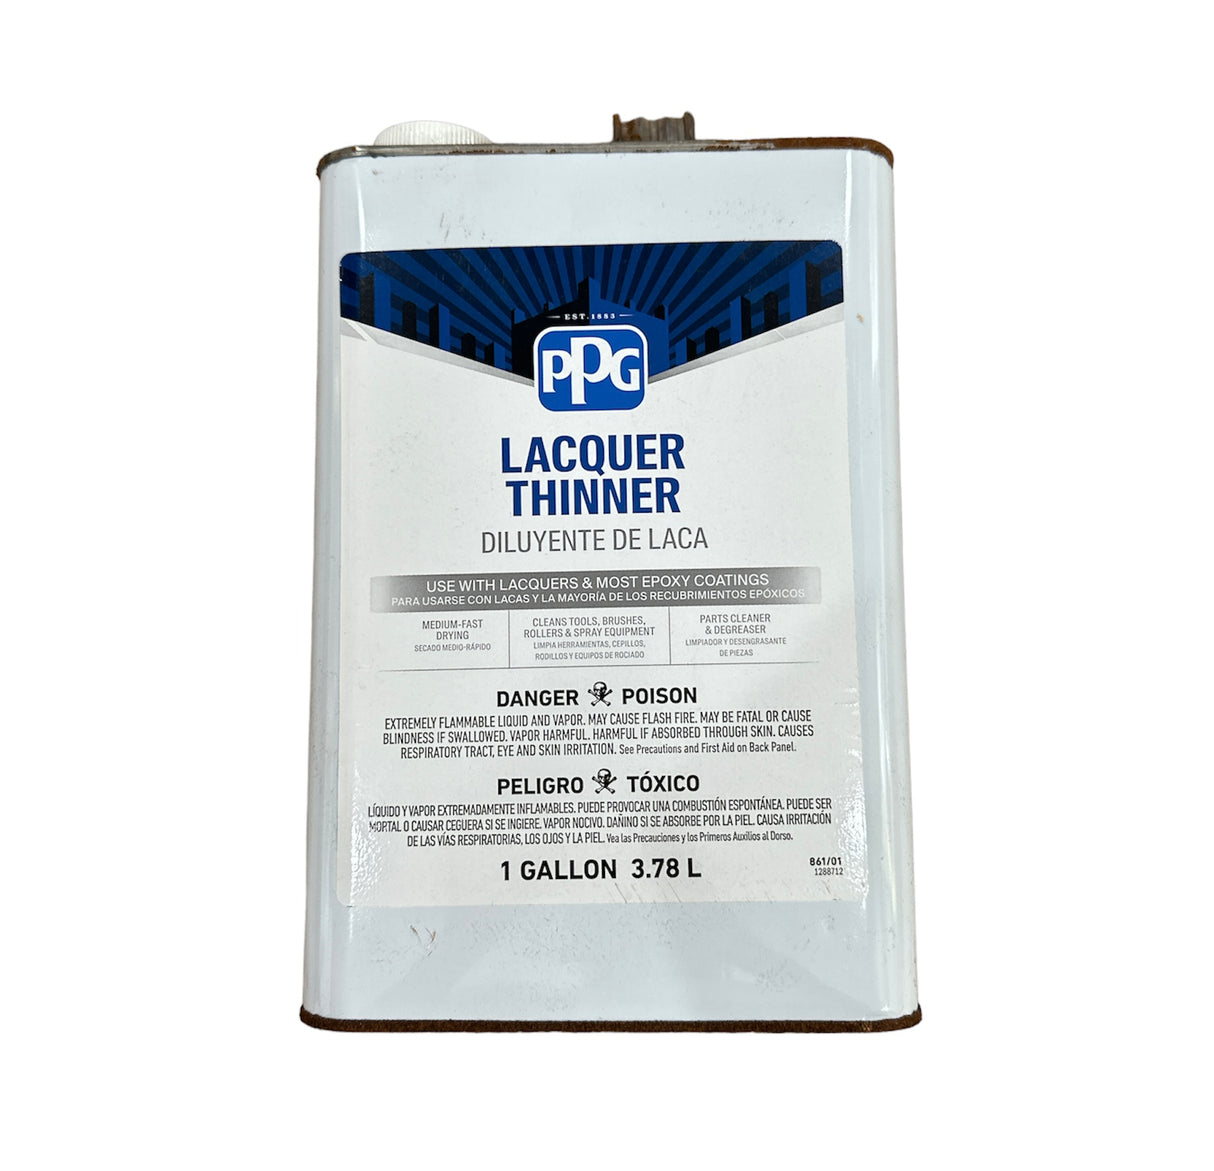 PPG Lacquer Thinner